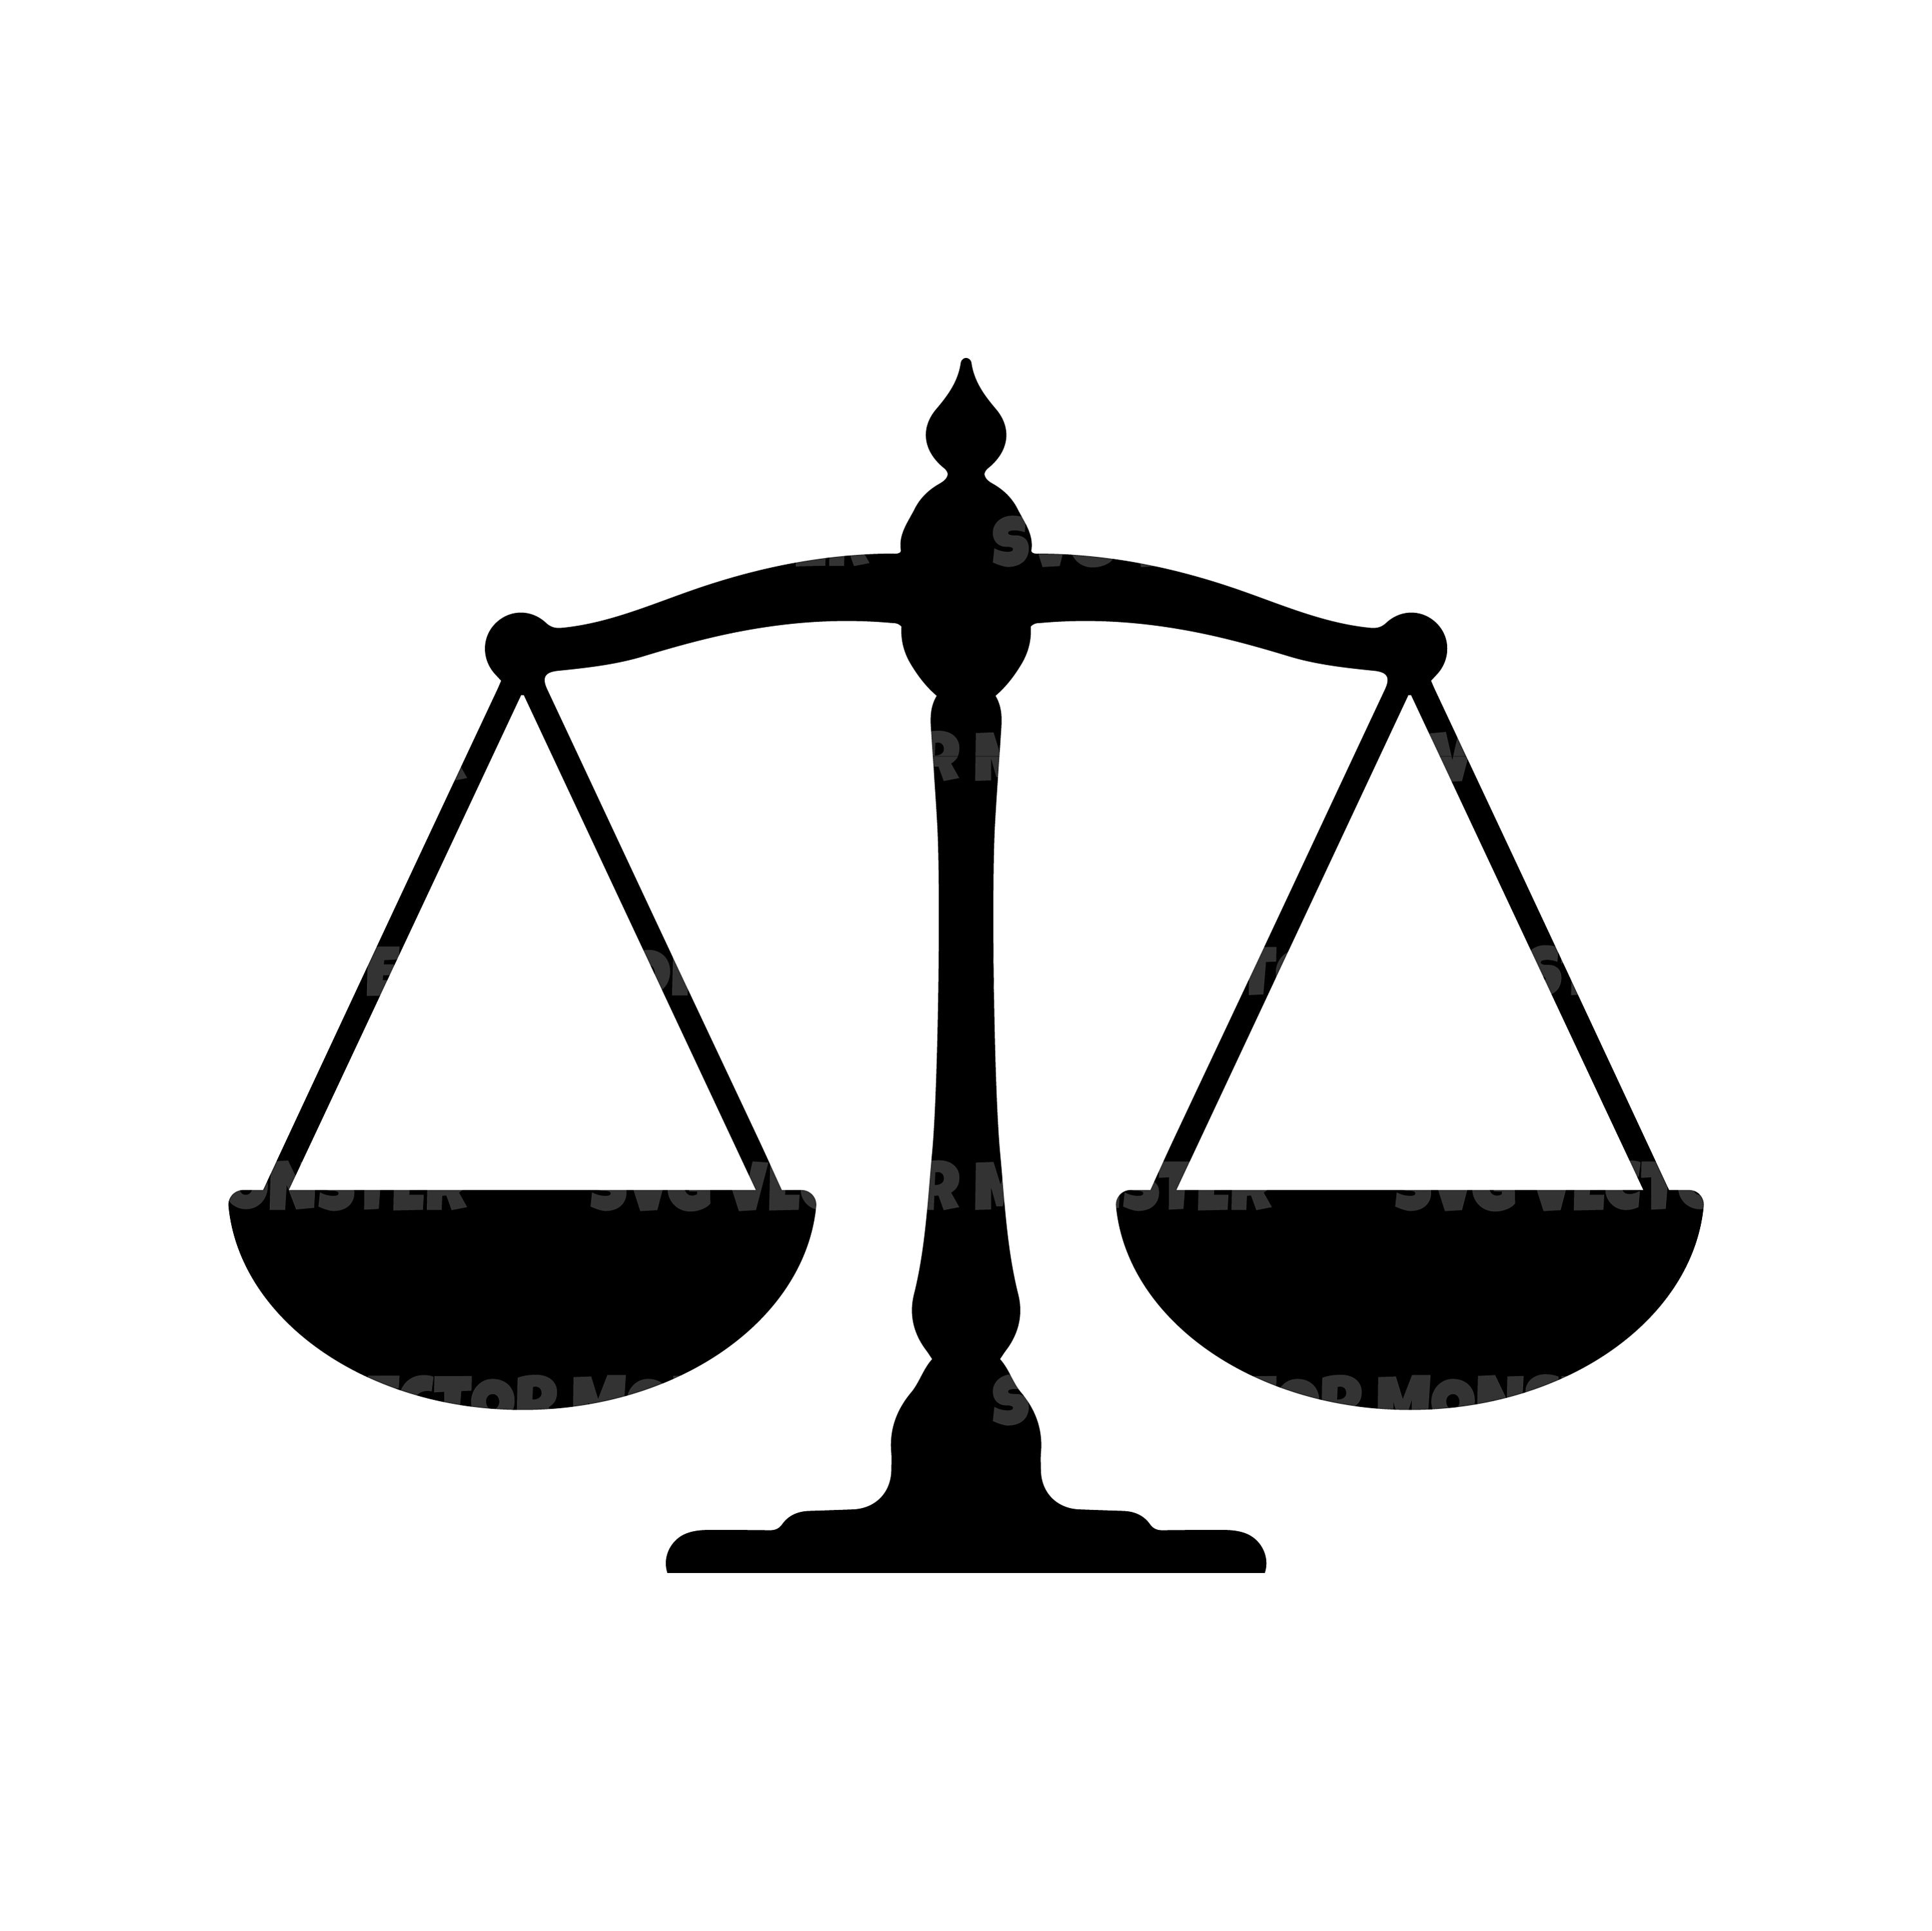 Scales of Justice Svg, Weight Scale Svg, Vector Cut File for Cricut,  Silhouette, Pdf Png Eps Dxf, Decal, Sticker, Vinyl, Pin -  Israel